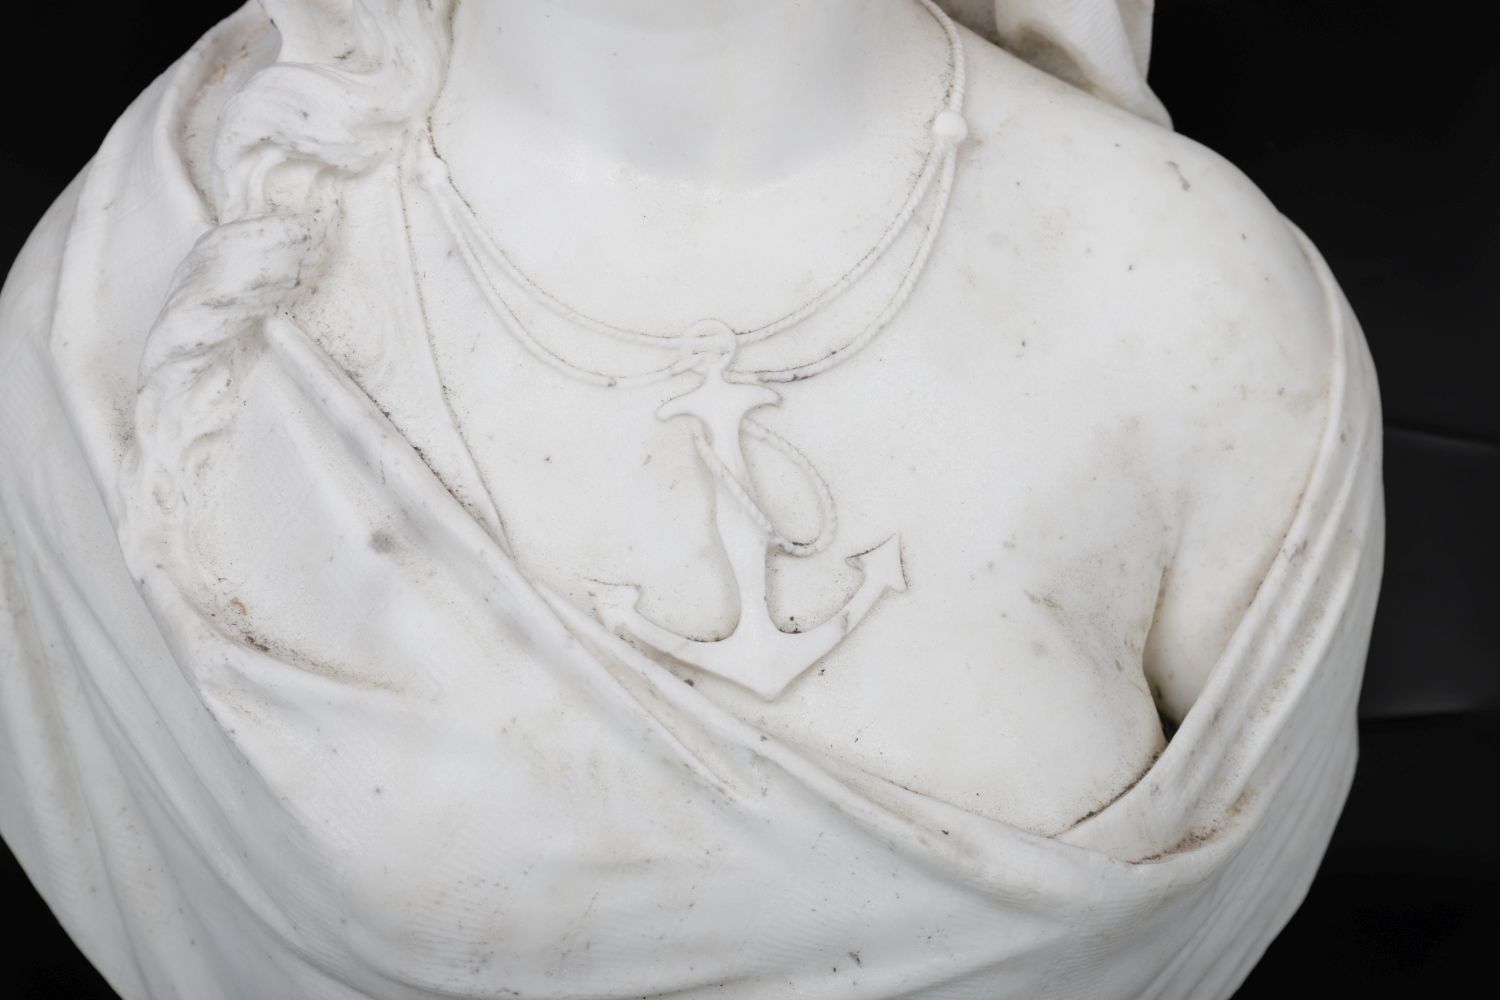 19TH-CENTURY FRENCH CARRARA MARBLE BUST - Image 3 of 4